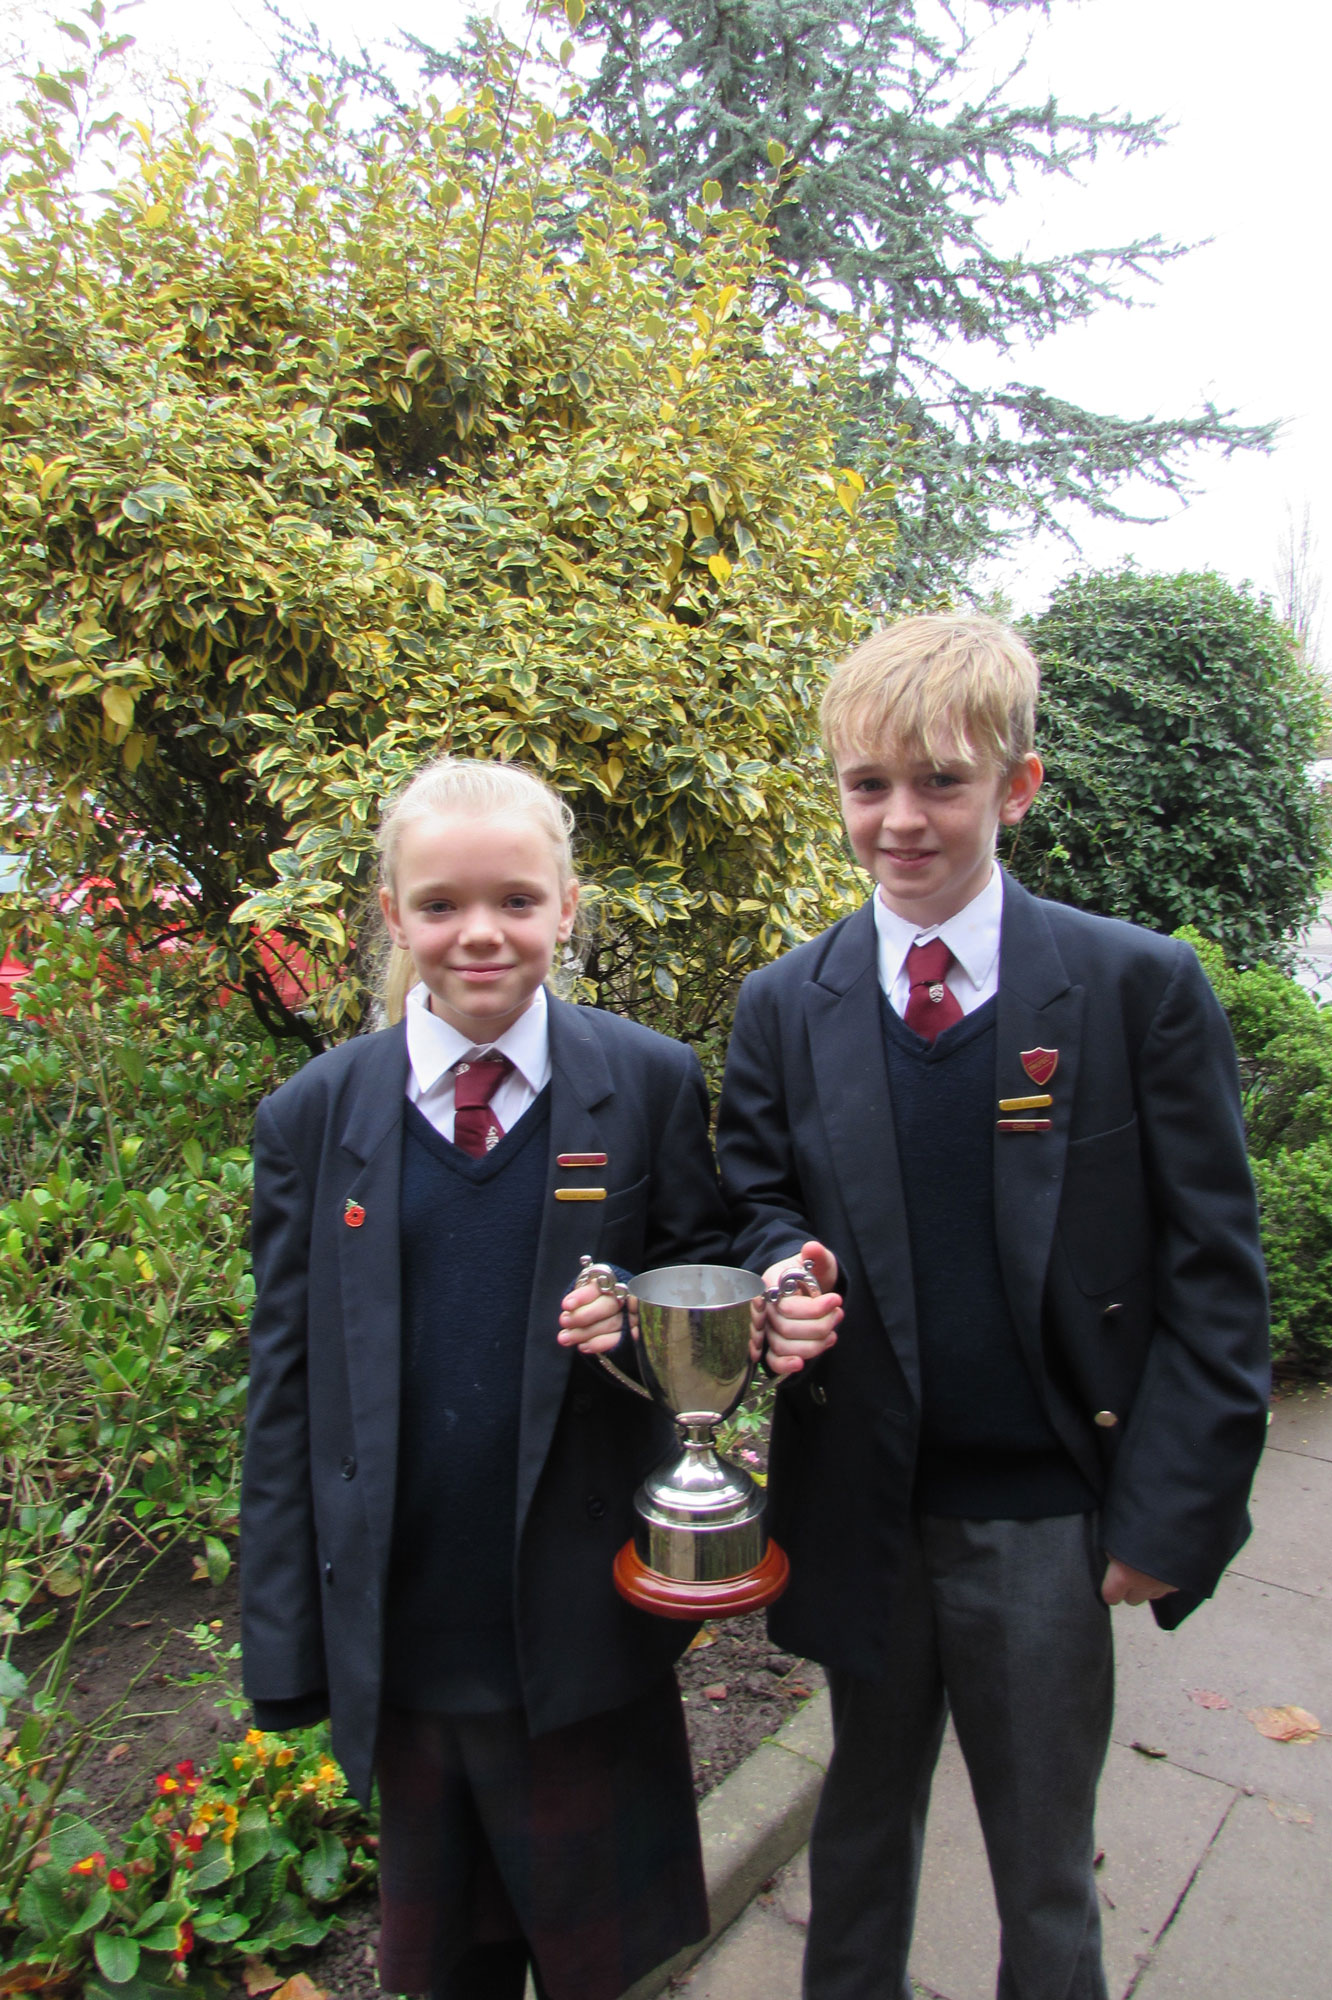 Darby House - winners of the 2014 Prep School House Singing Competition